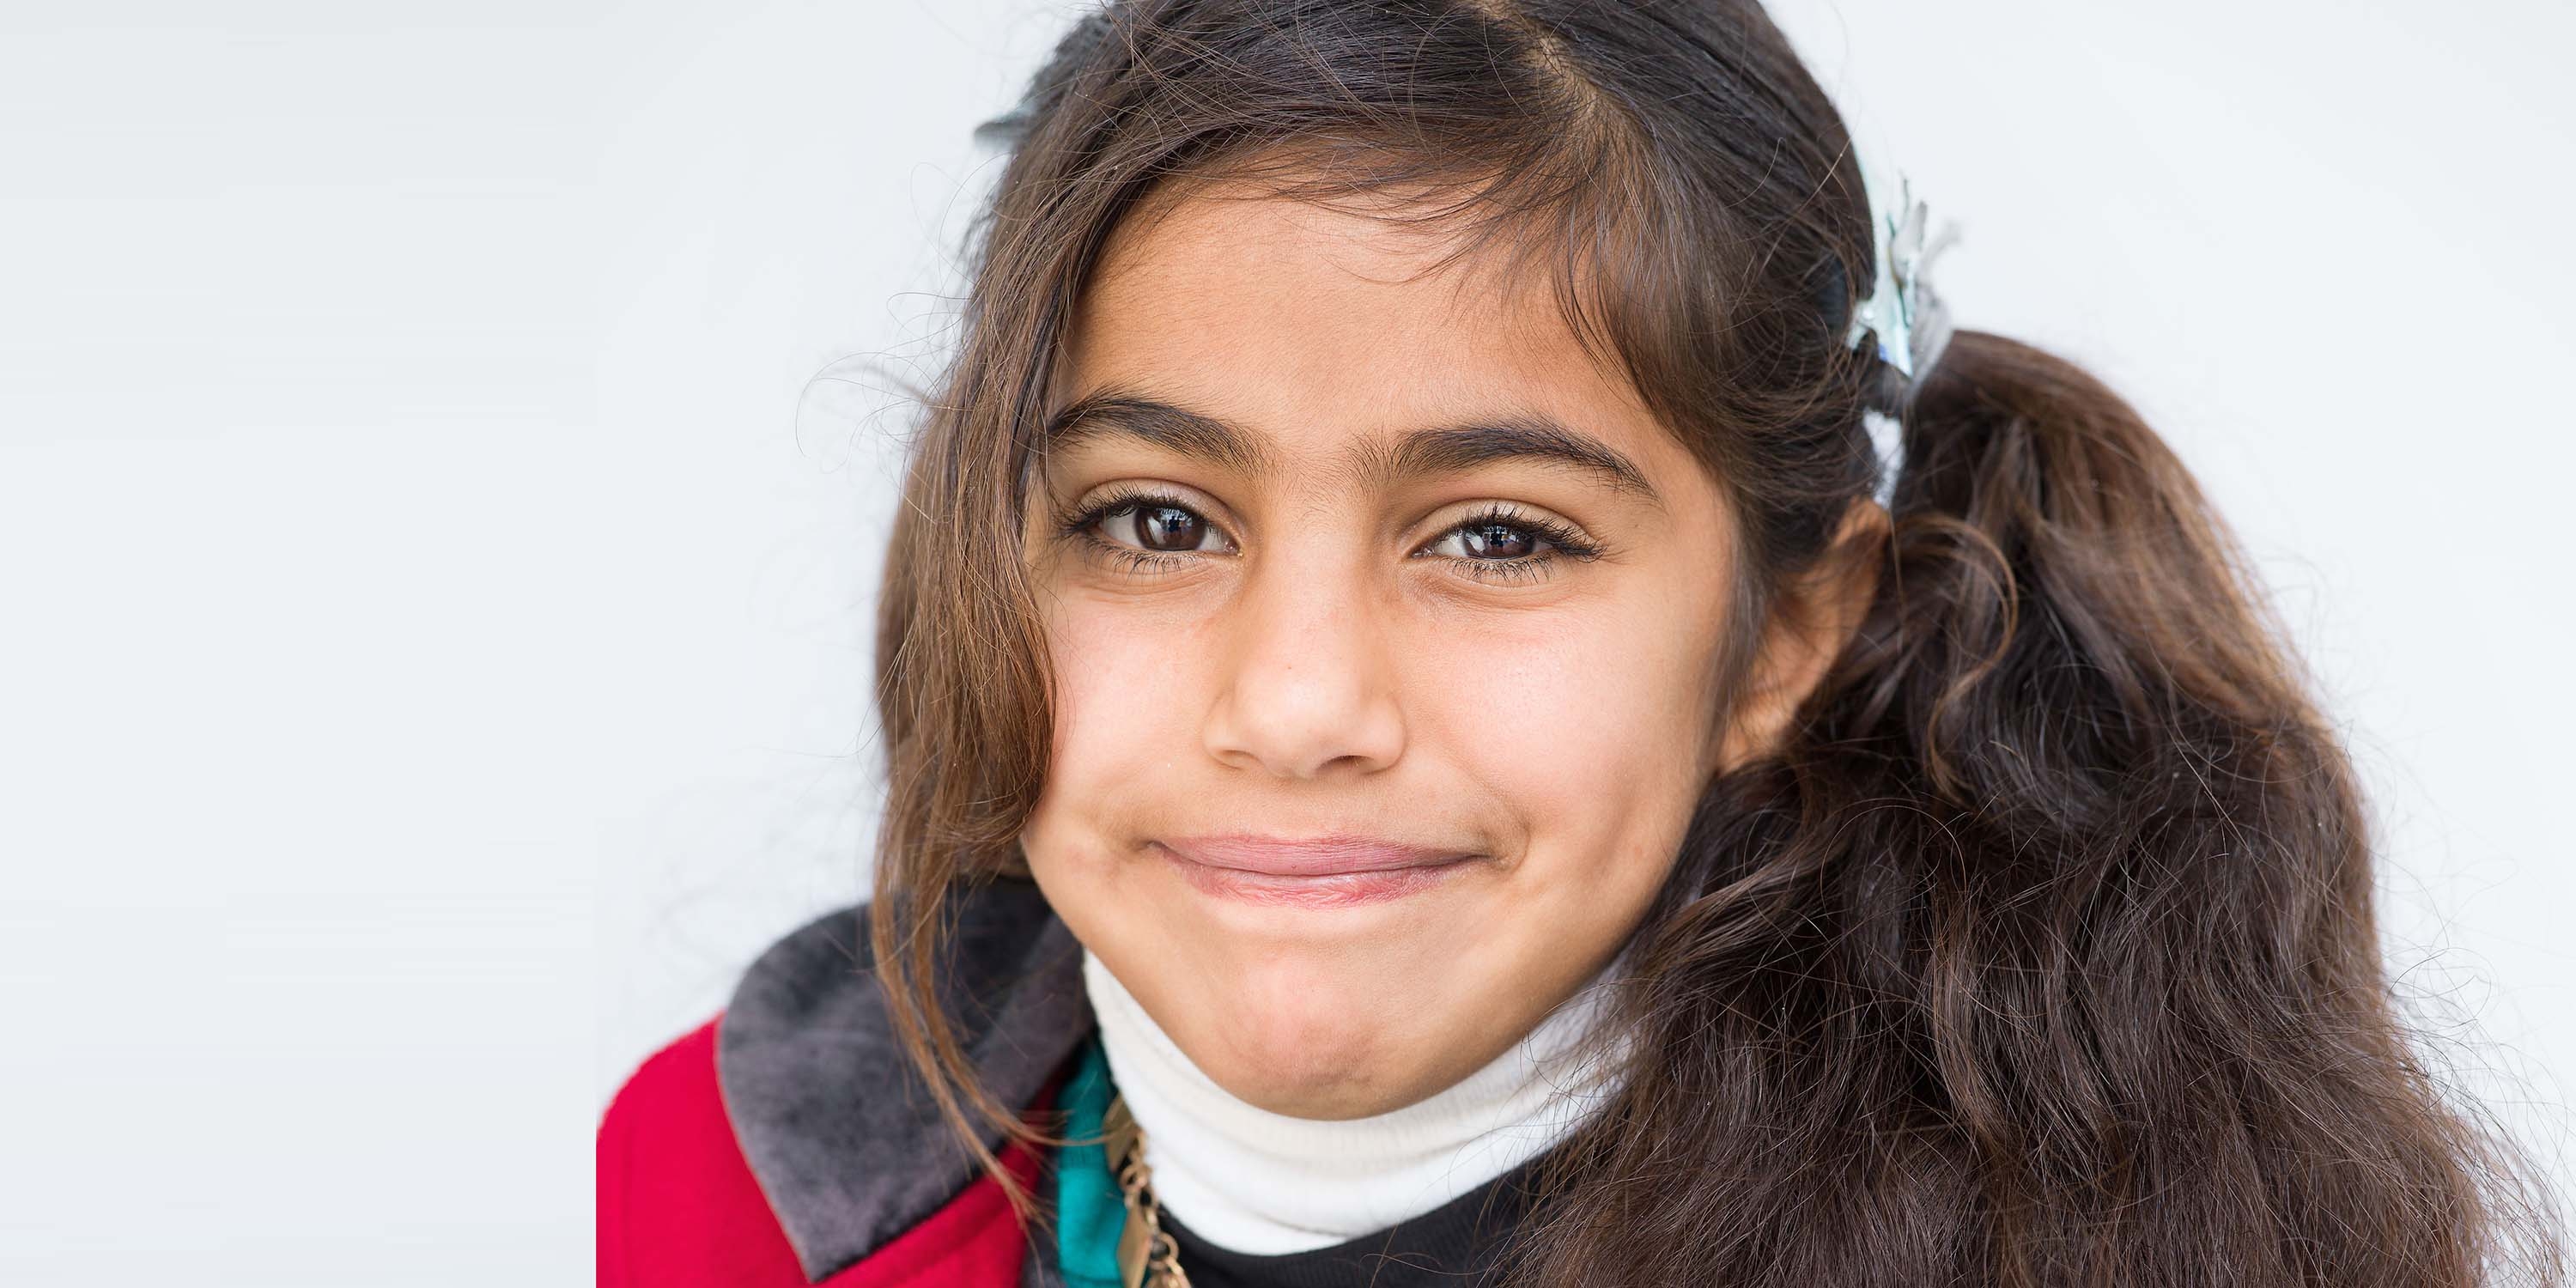 Syria, a 7 yr. old girl with a side ponytail smiles at the camera